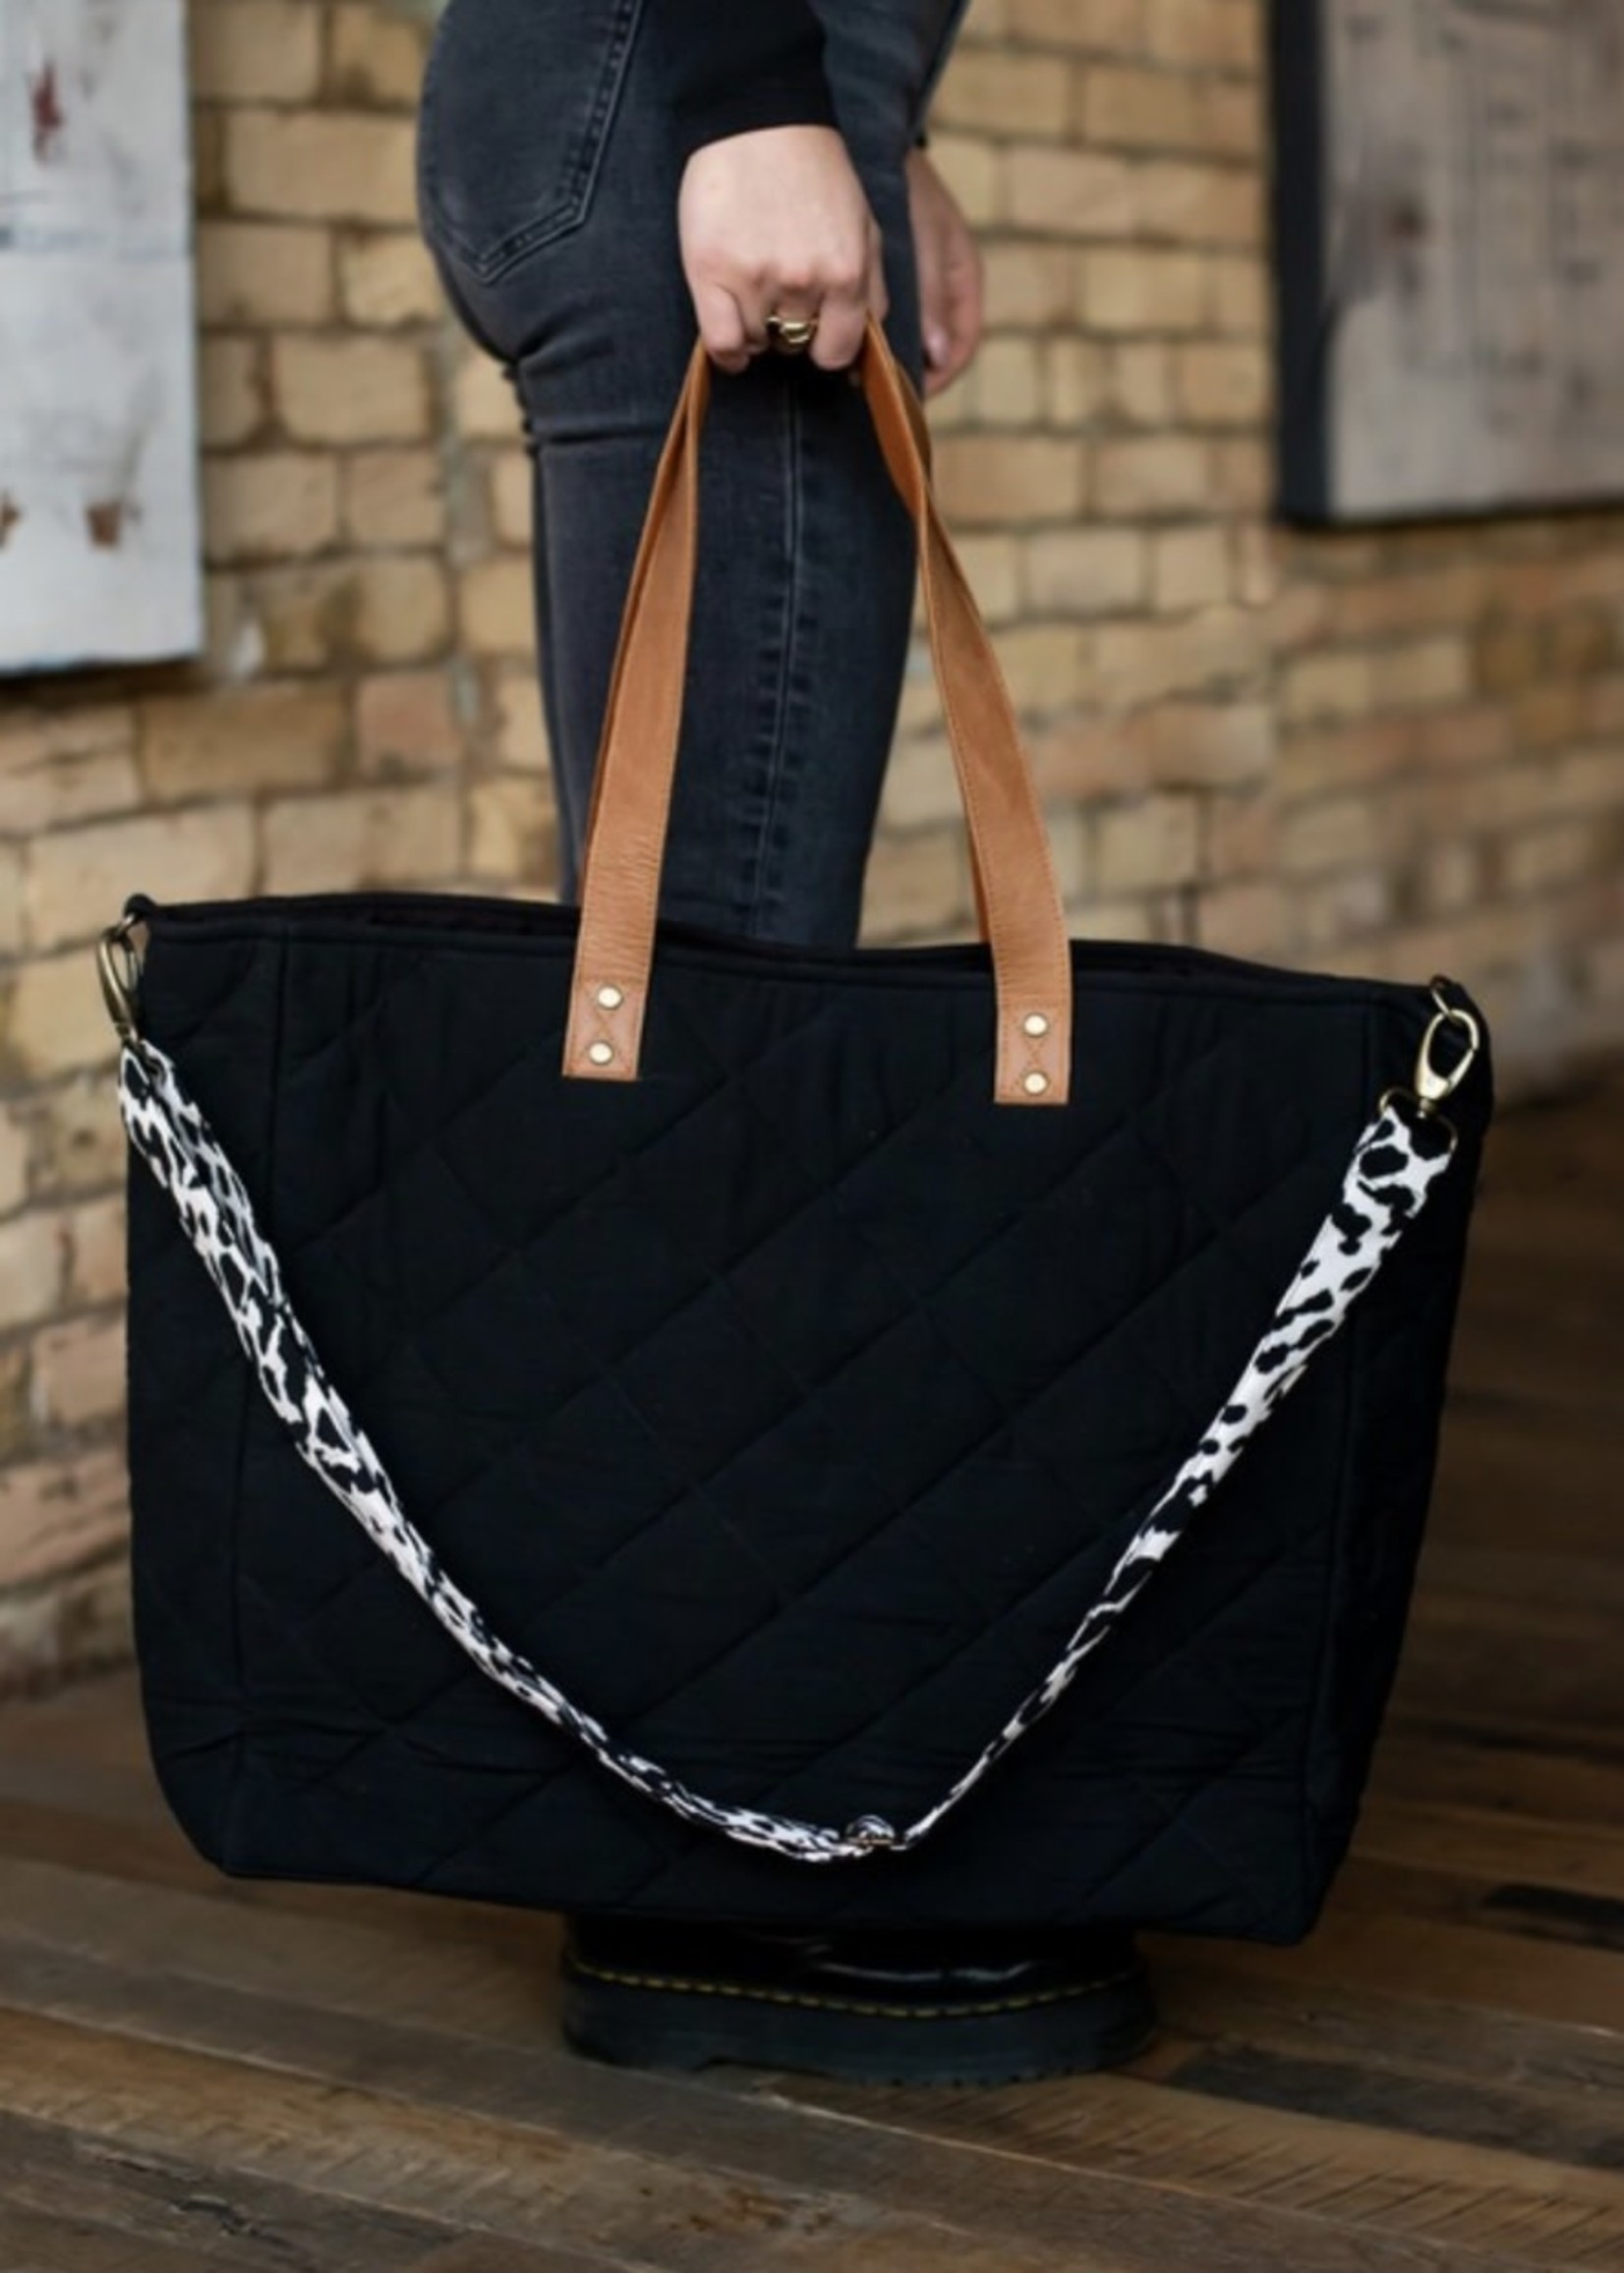 Quilted Tote with Animal Priny Strap